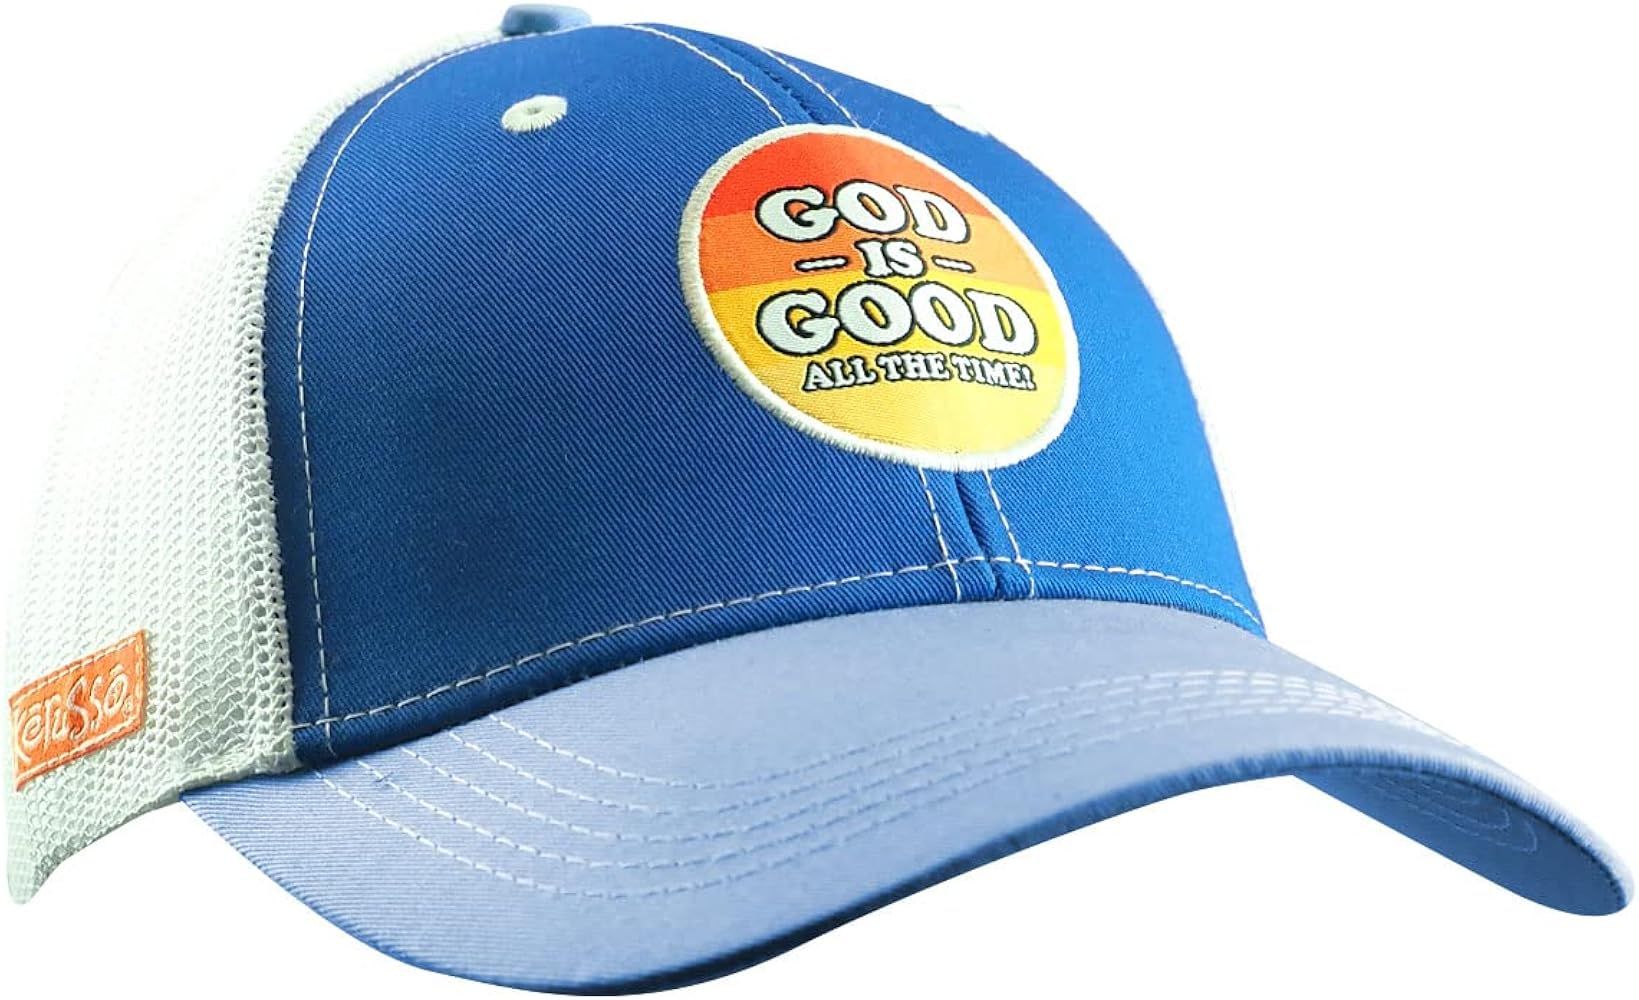 Kerusso Mens Cap - God is Good - Blue - One Size Fits Most | Amazon (US)